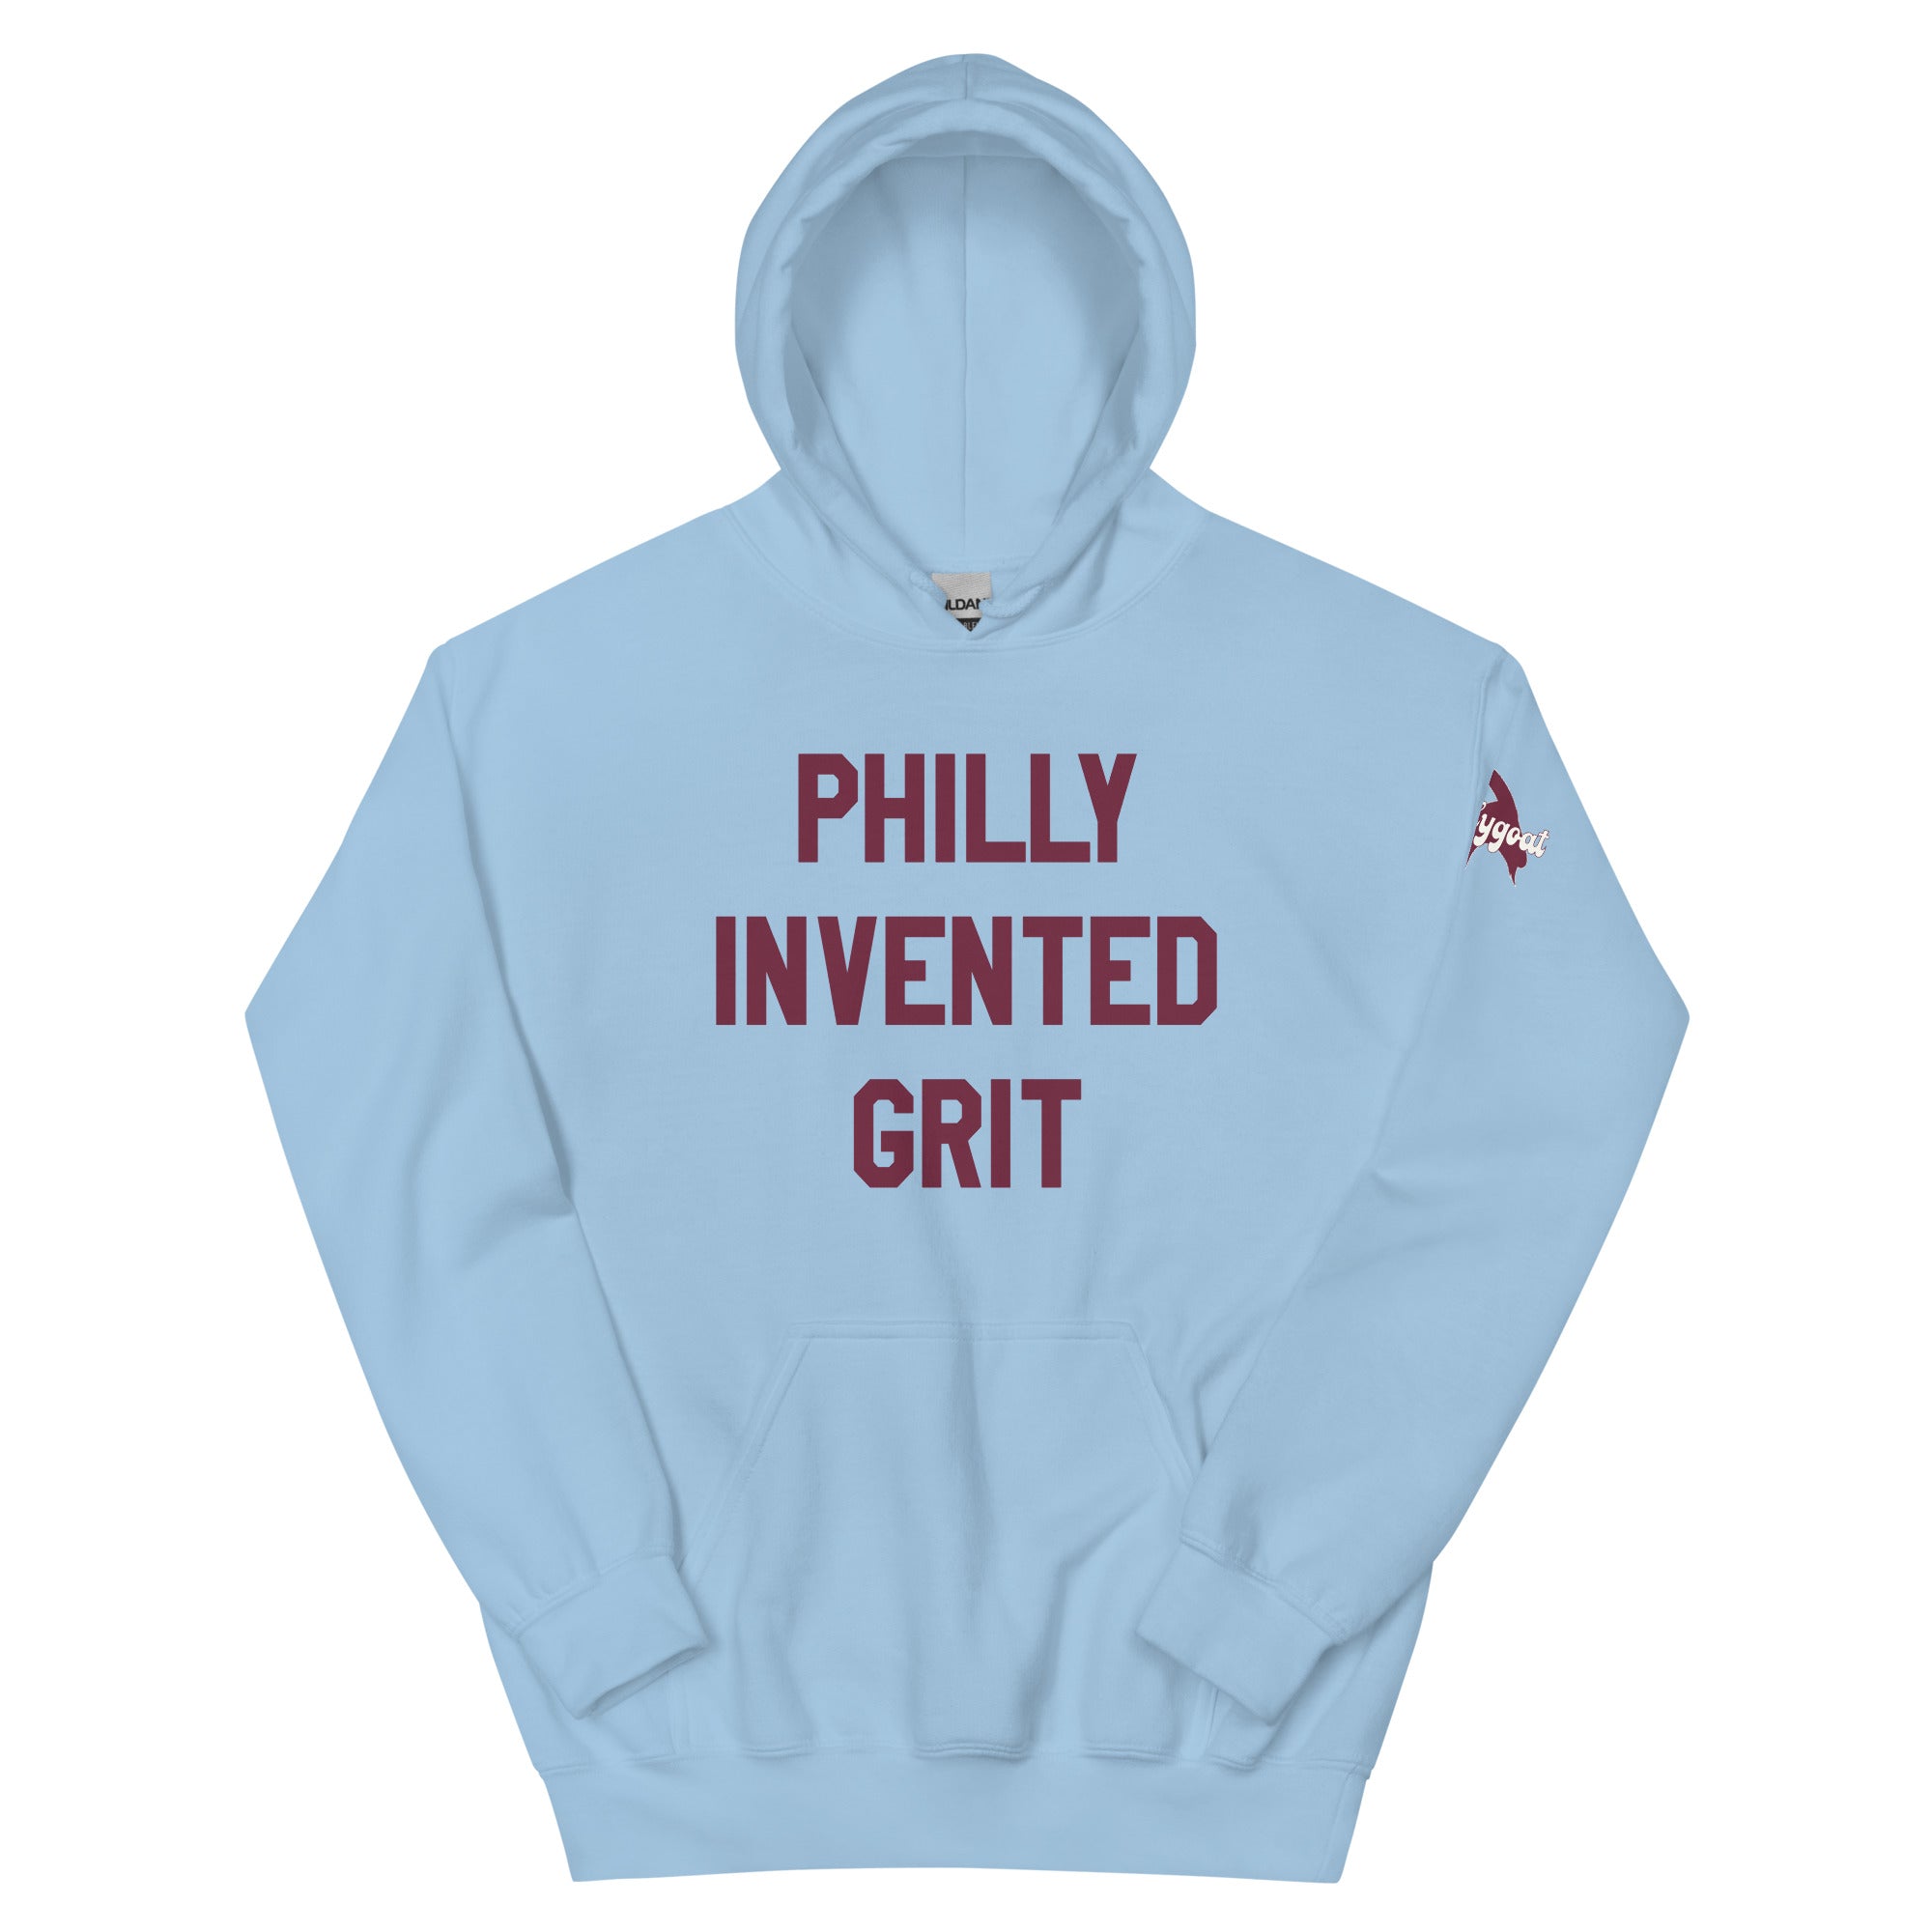 Philadelphia Phillies philly invented grit light blue hoodie Phillygoat